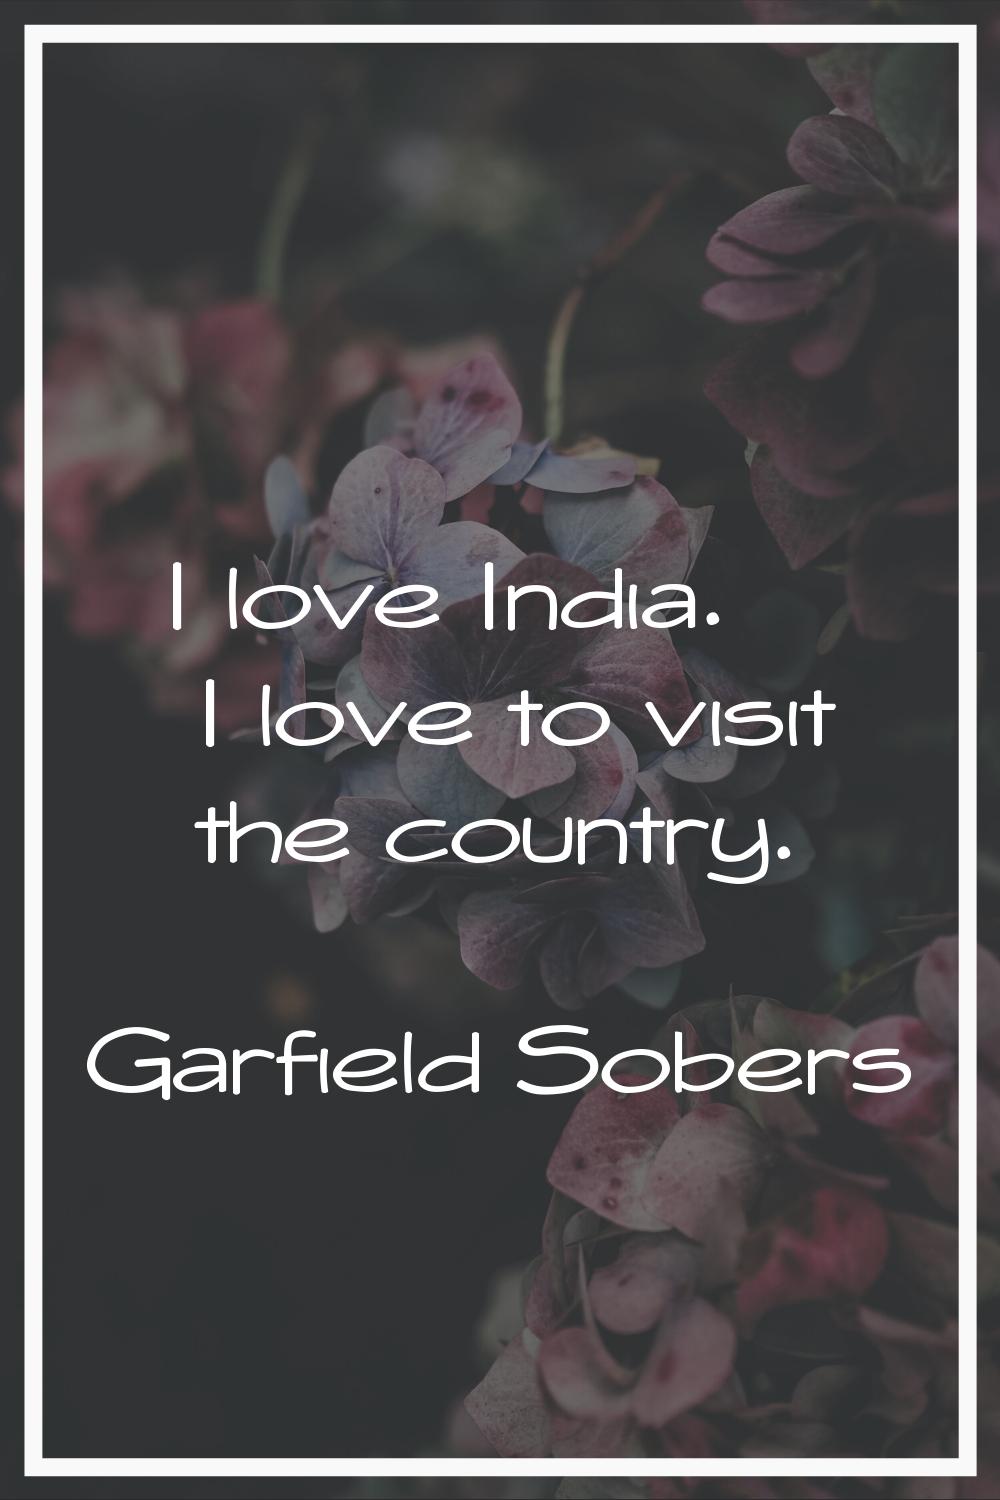 I love India. I love to visit the country.